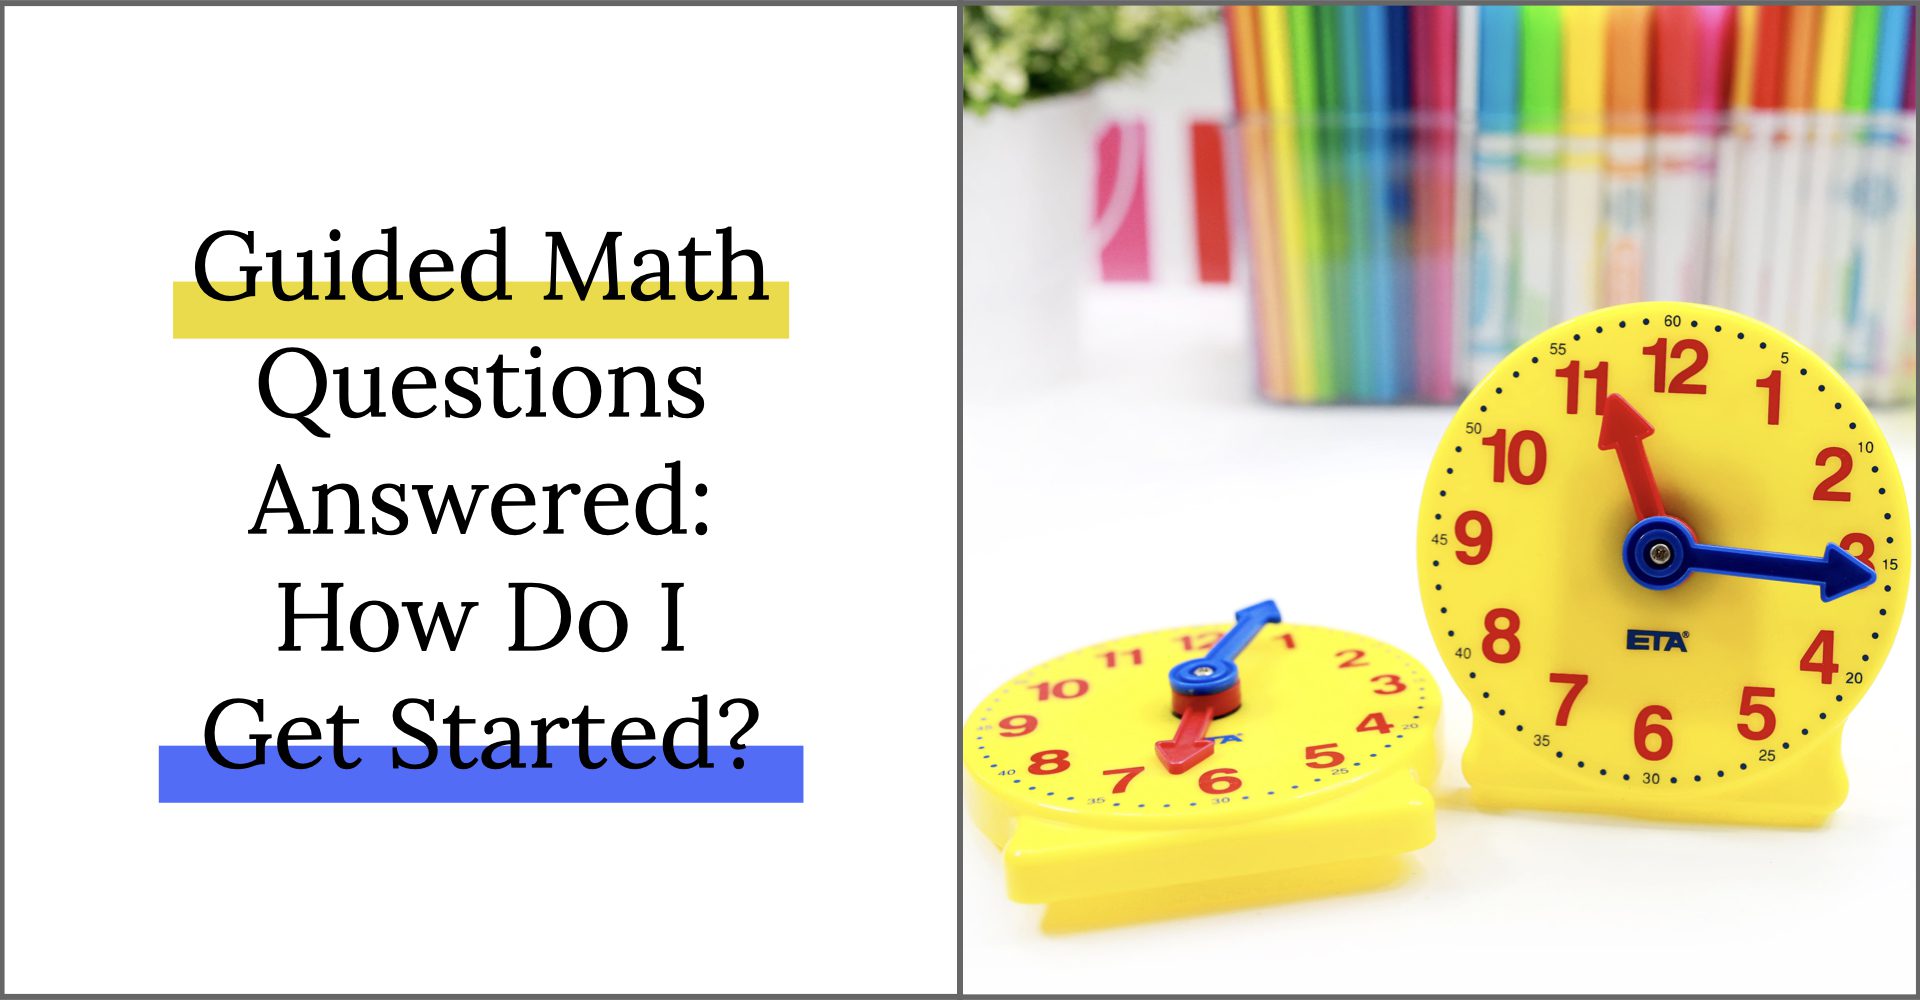 How to Launch Guided Math in 3 easy steps